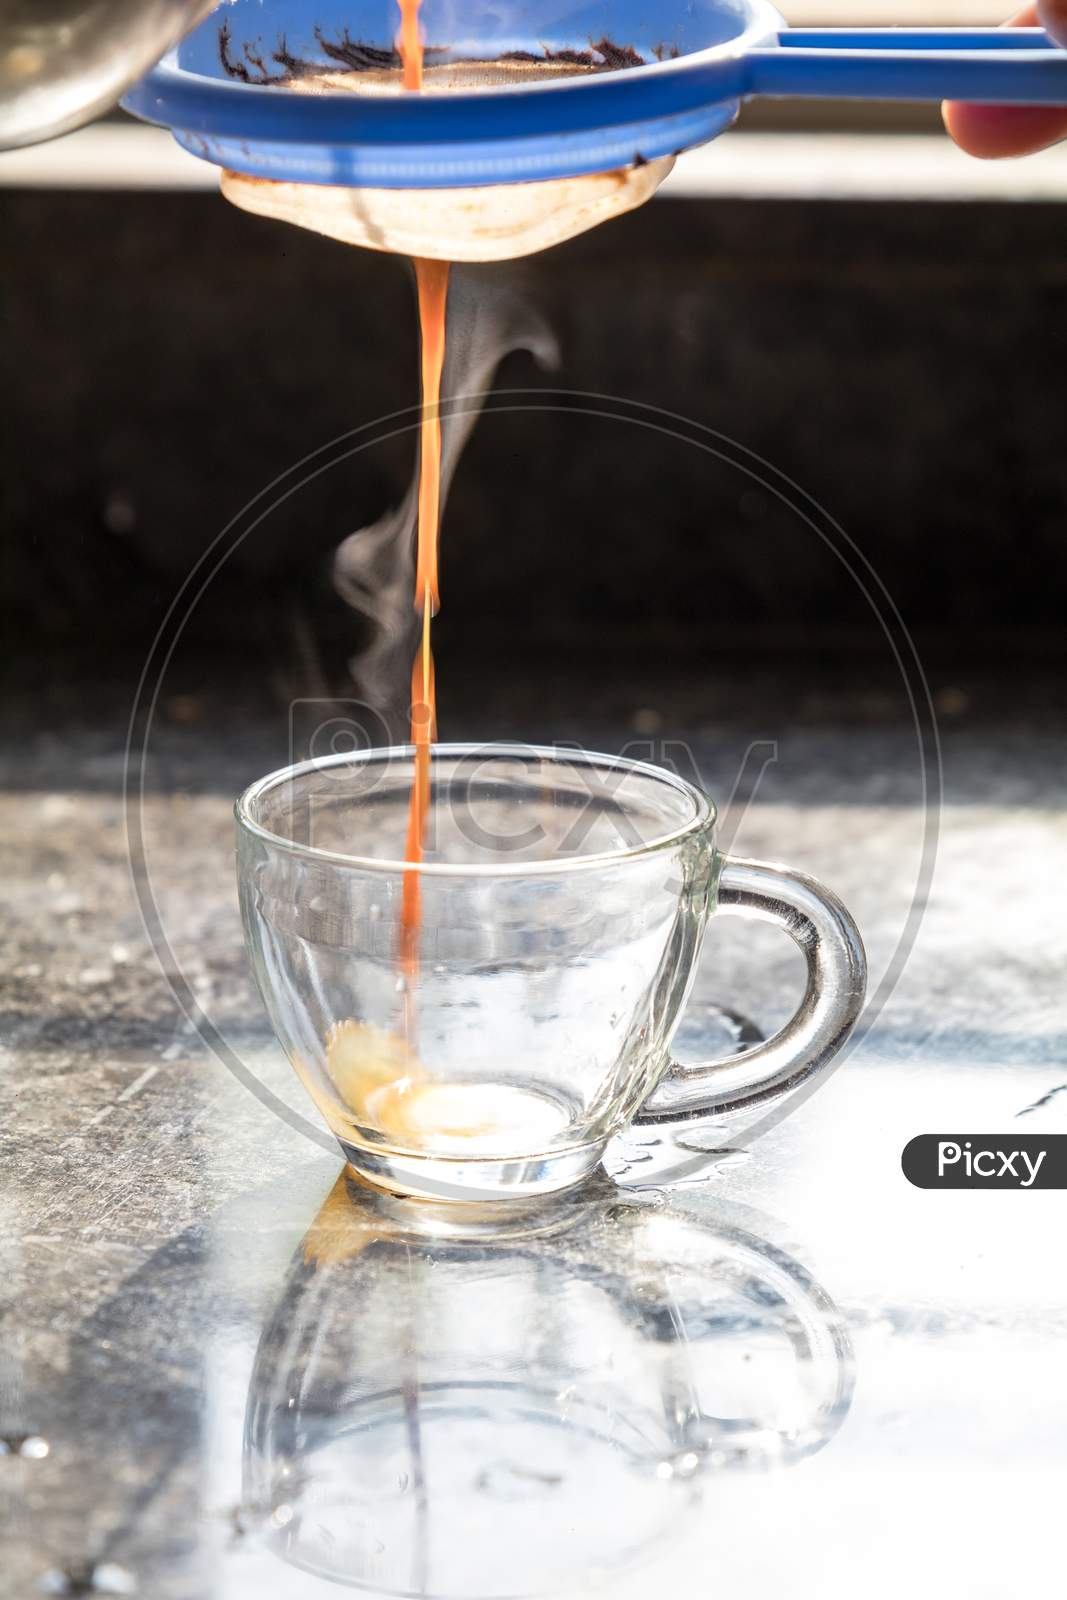 Steamy Masala Tea Being Poured Into A Transparent Glass Cup